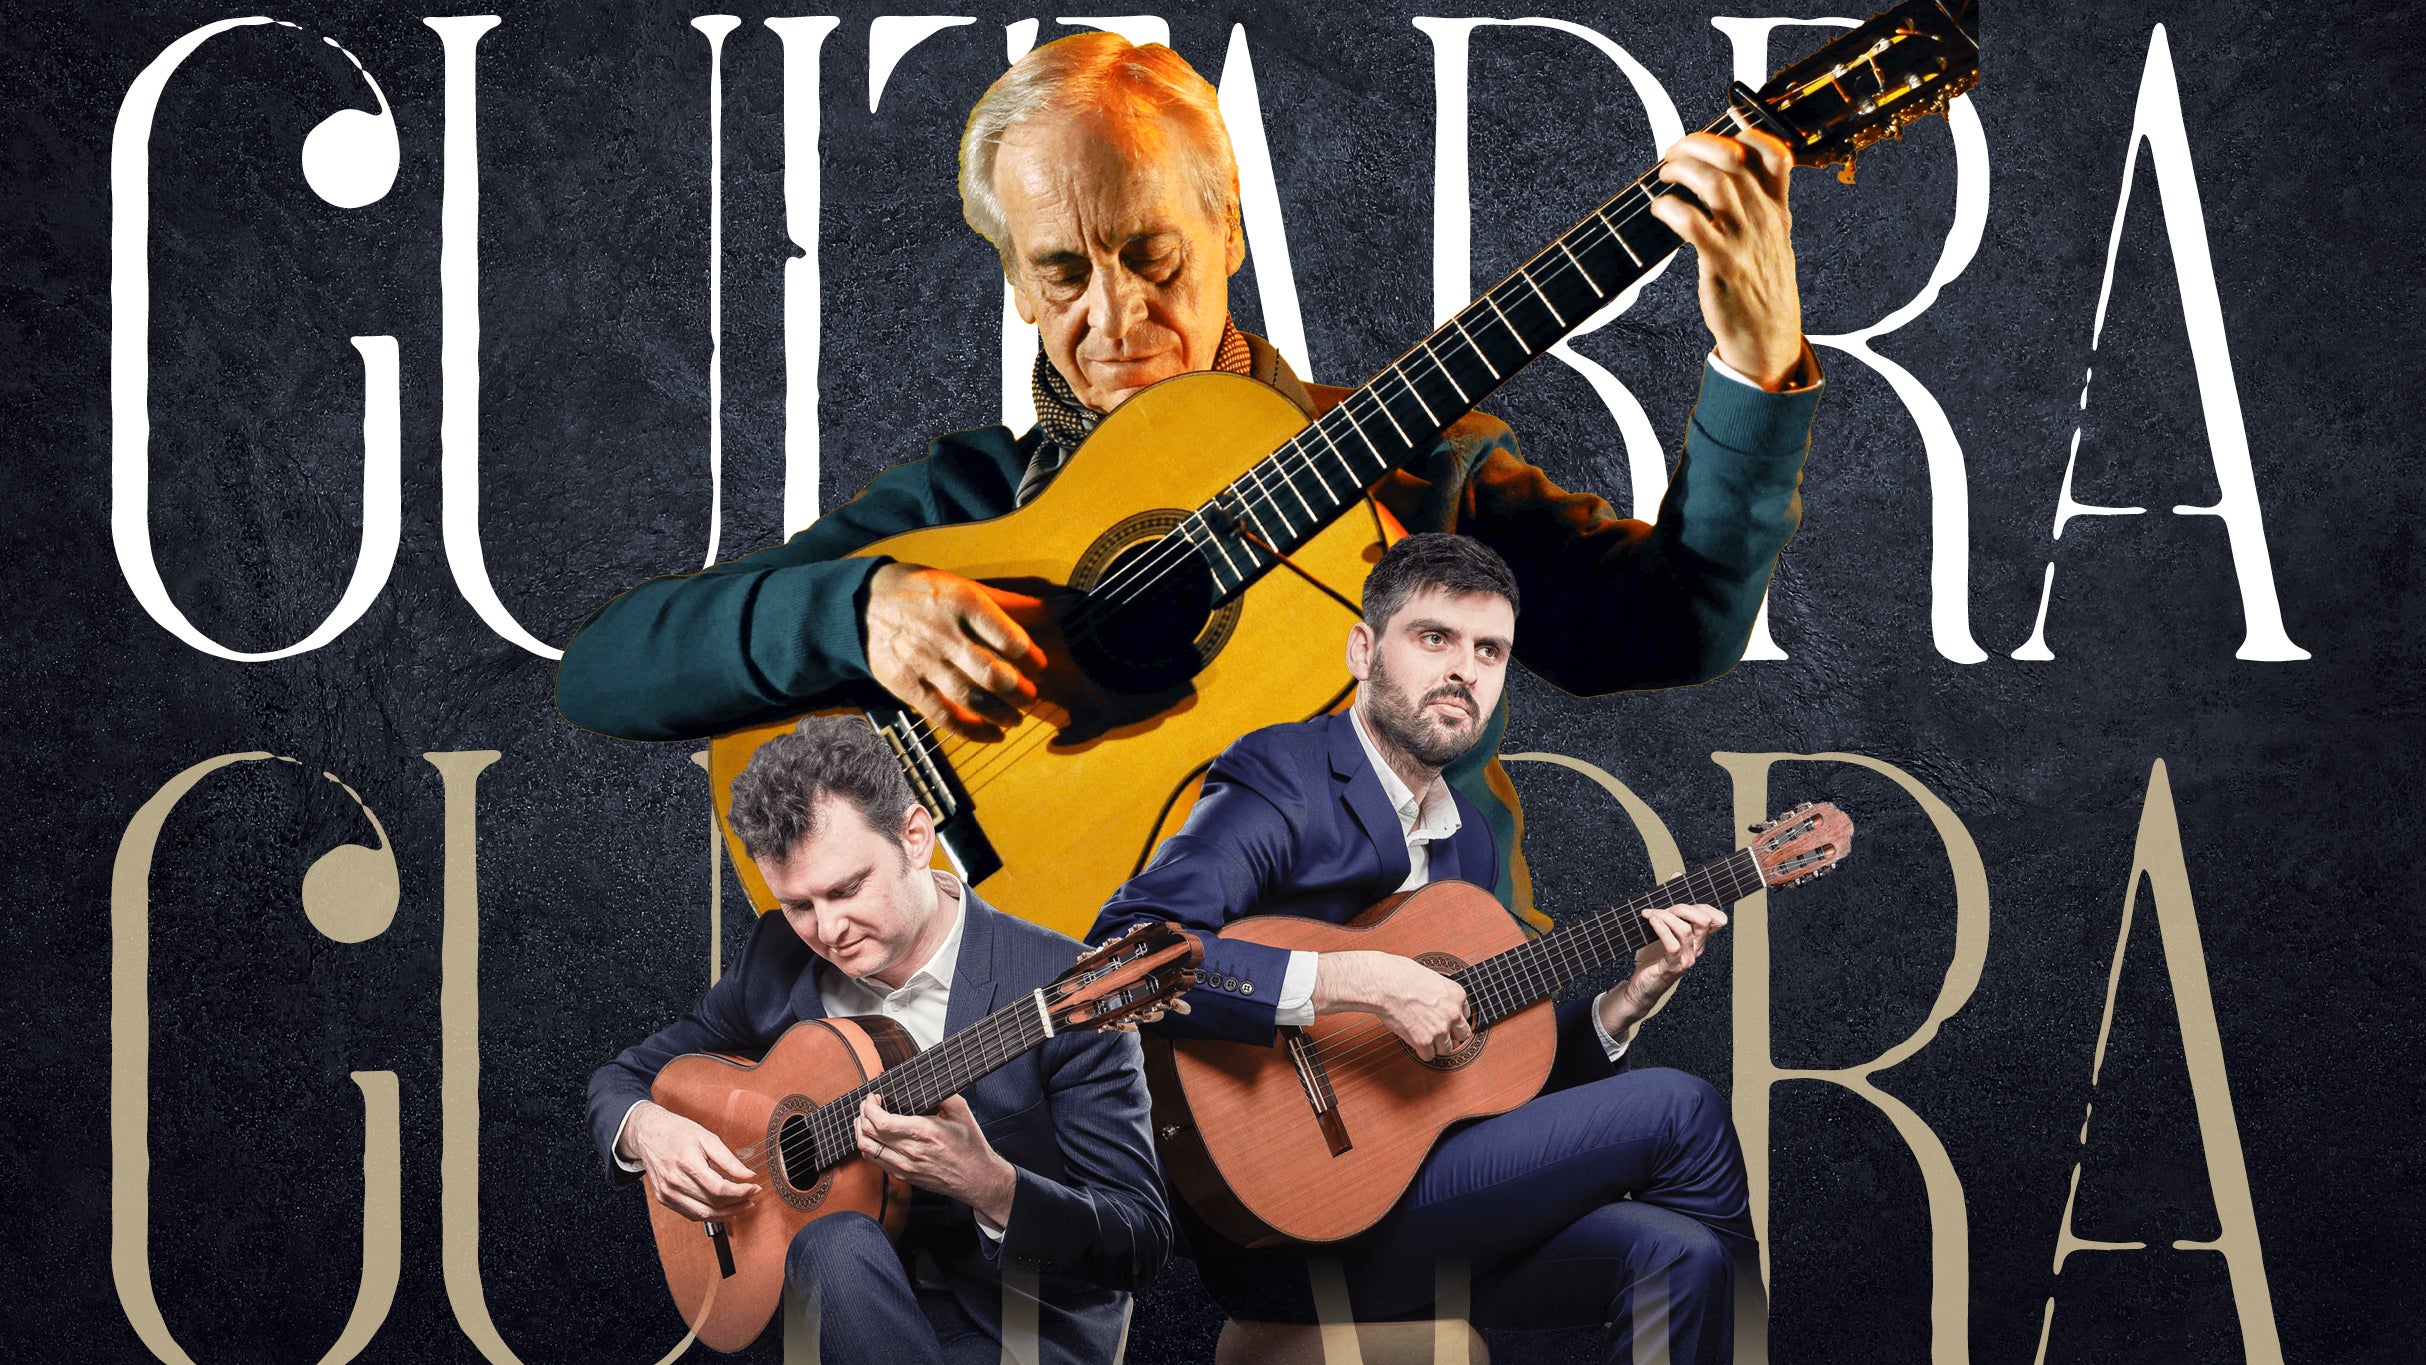 Guitarra / Paco Pena / The Grigoryan Brothers in Auckland promo photo for Exclusive presale offer code